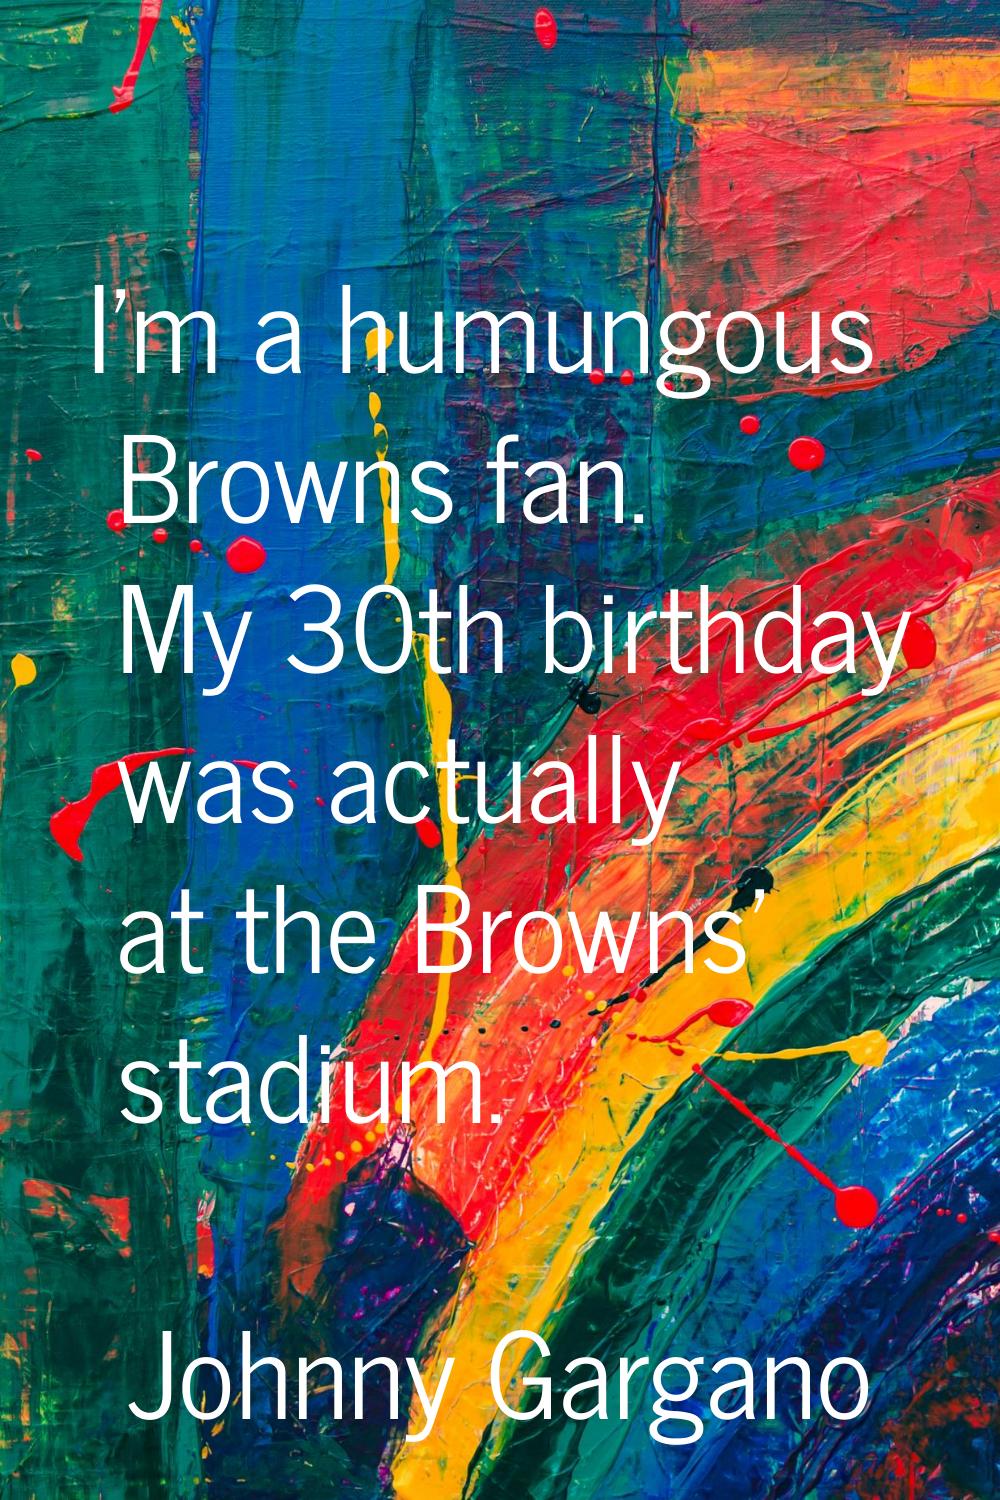 I'm a humungous Browns fan. My 30th birthday was actually at the Browns' stadium.